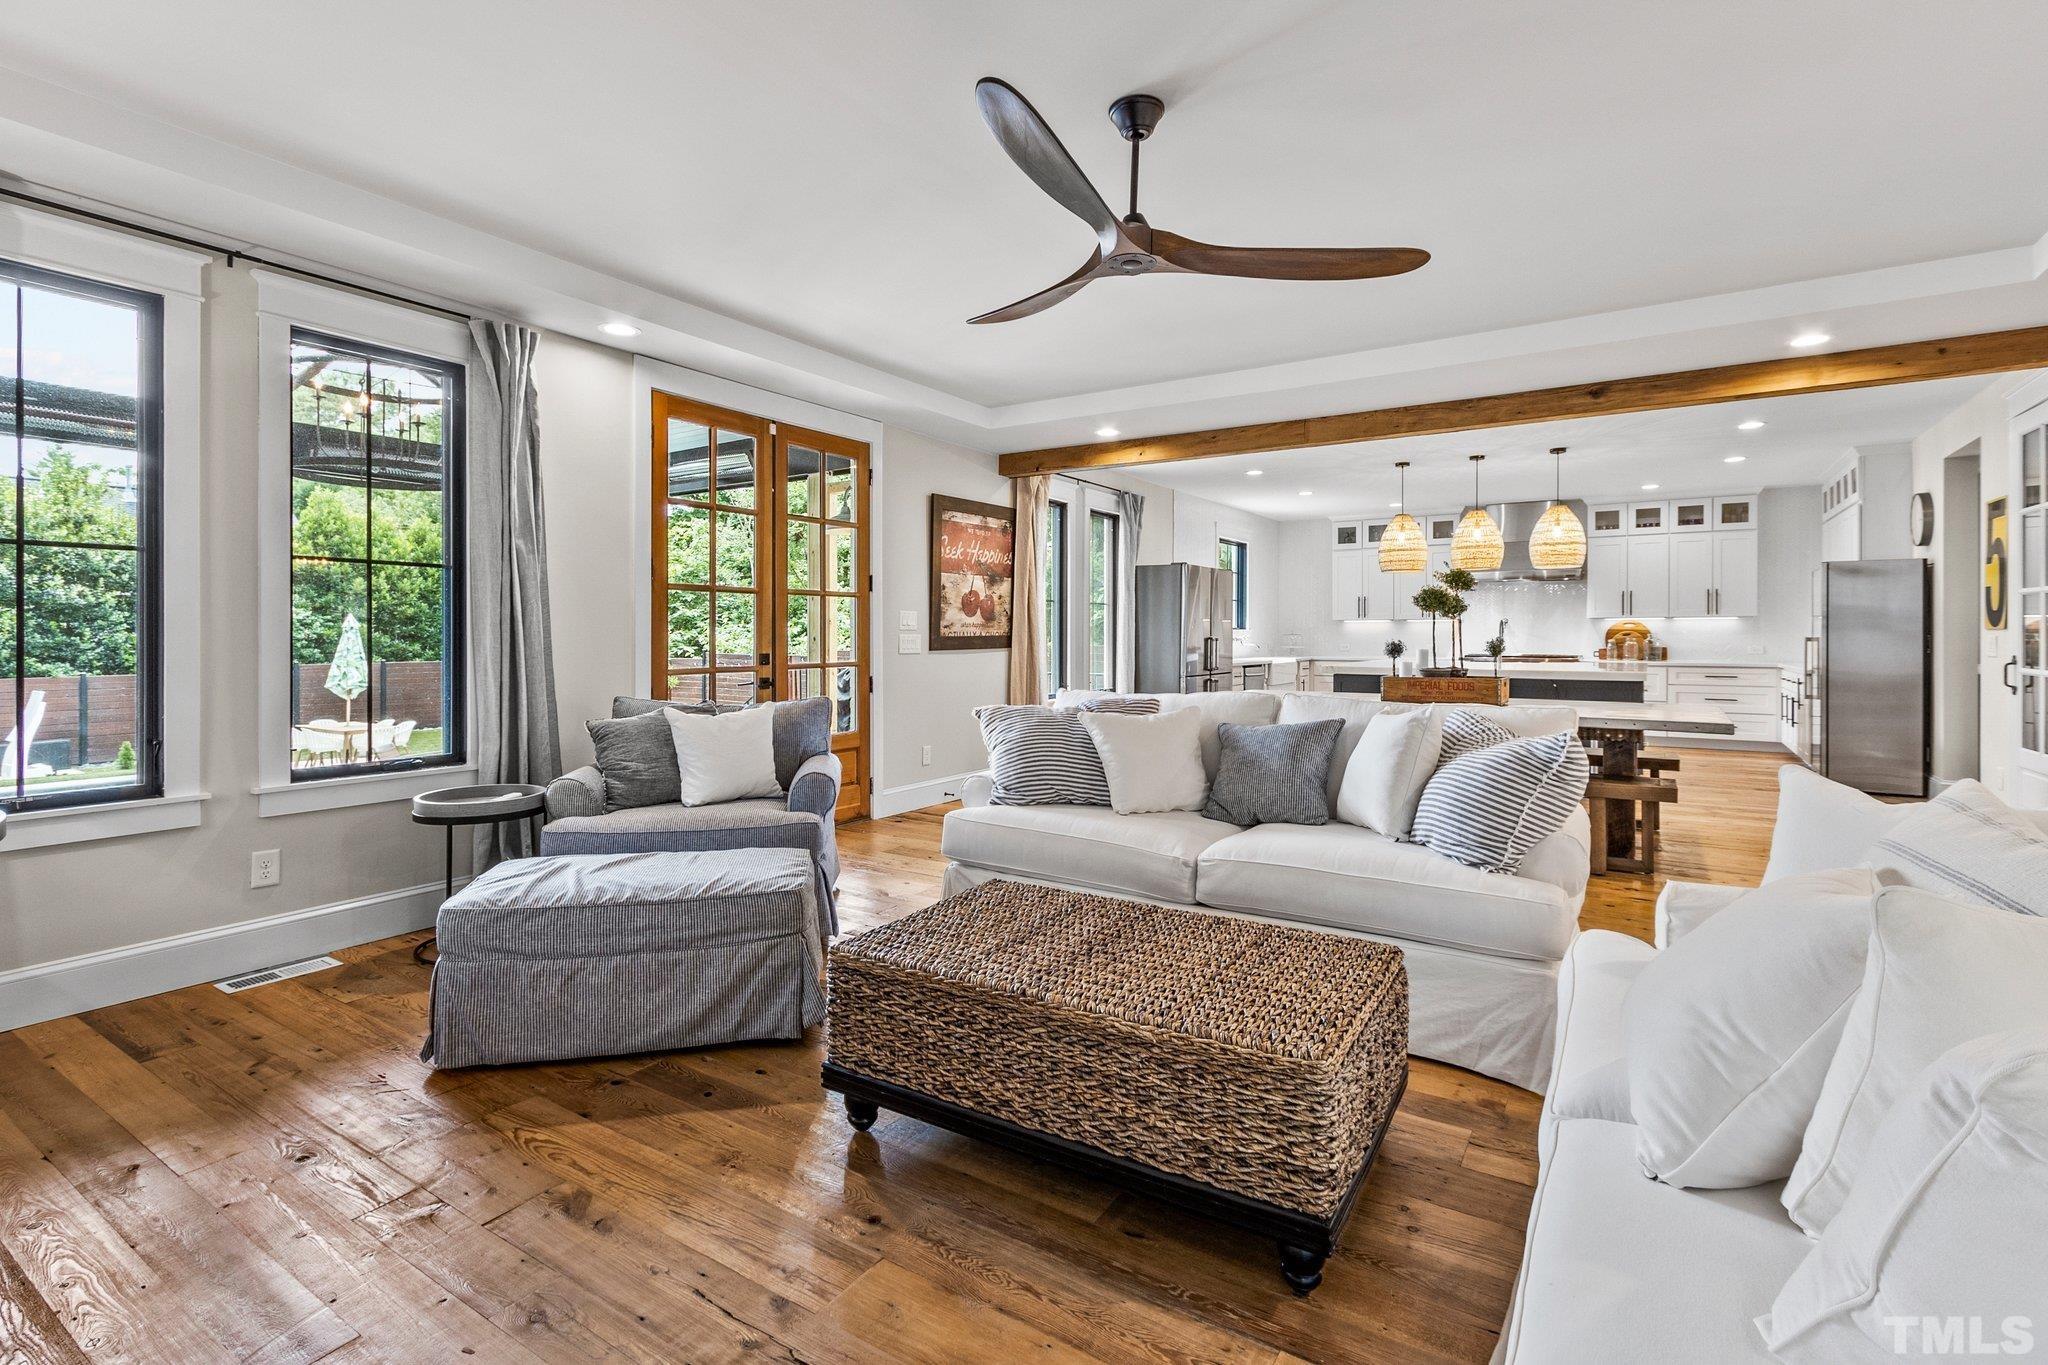 Enormous family room, open to the kitchen, with easy step-out to the covered porch. Enjoy a whole-house breeze with the Marvin casement windows throughout the first floor.